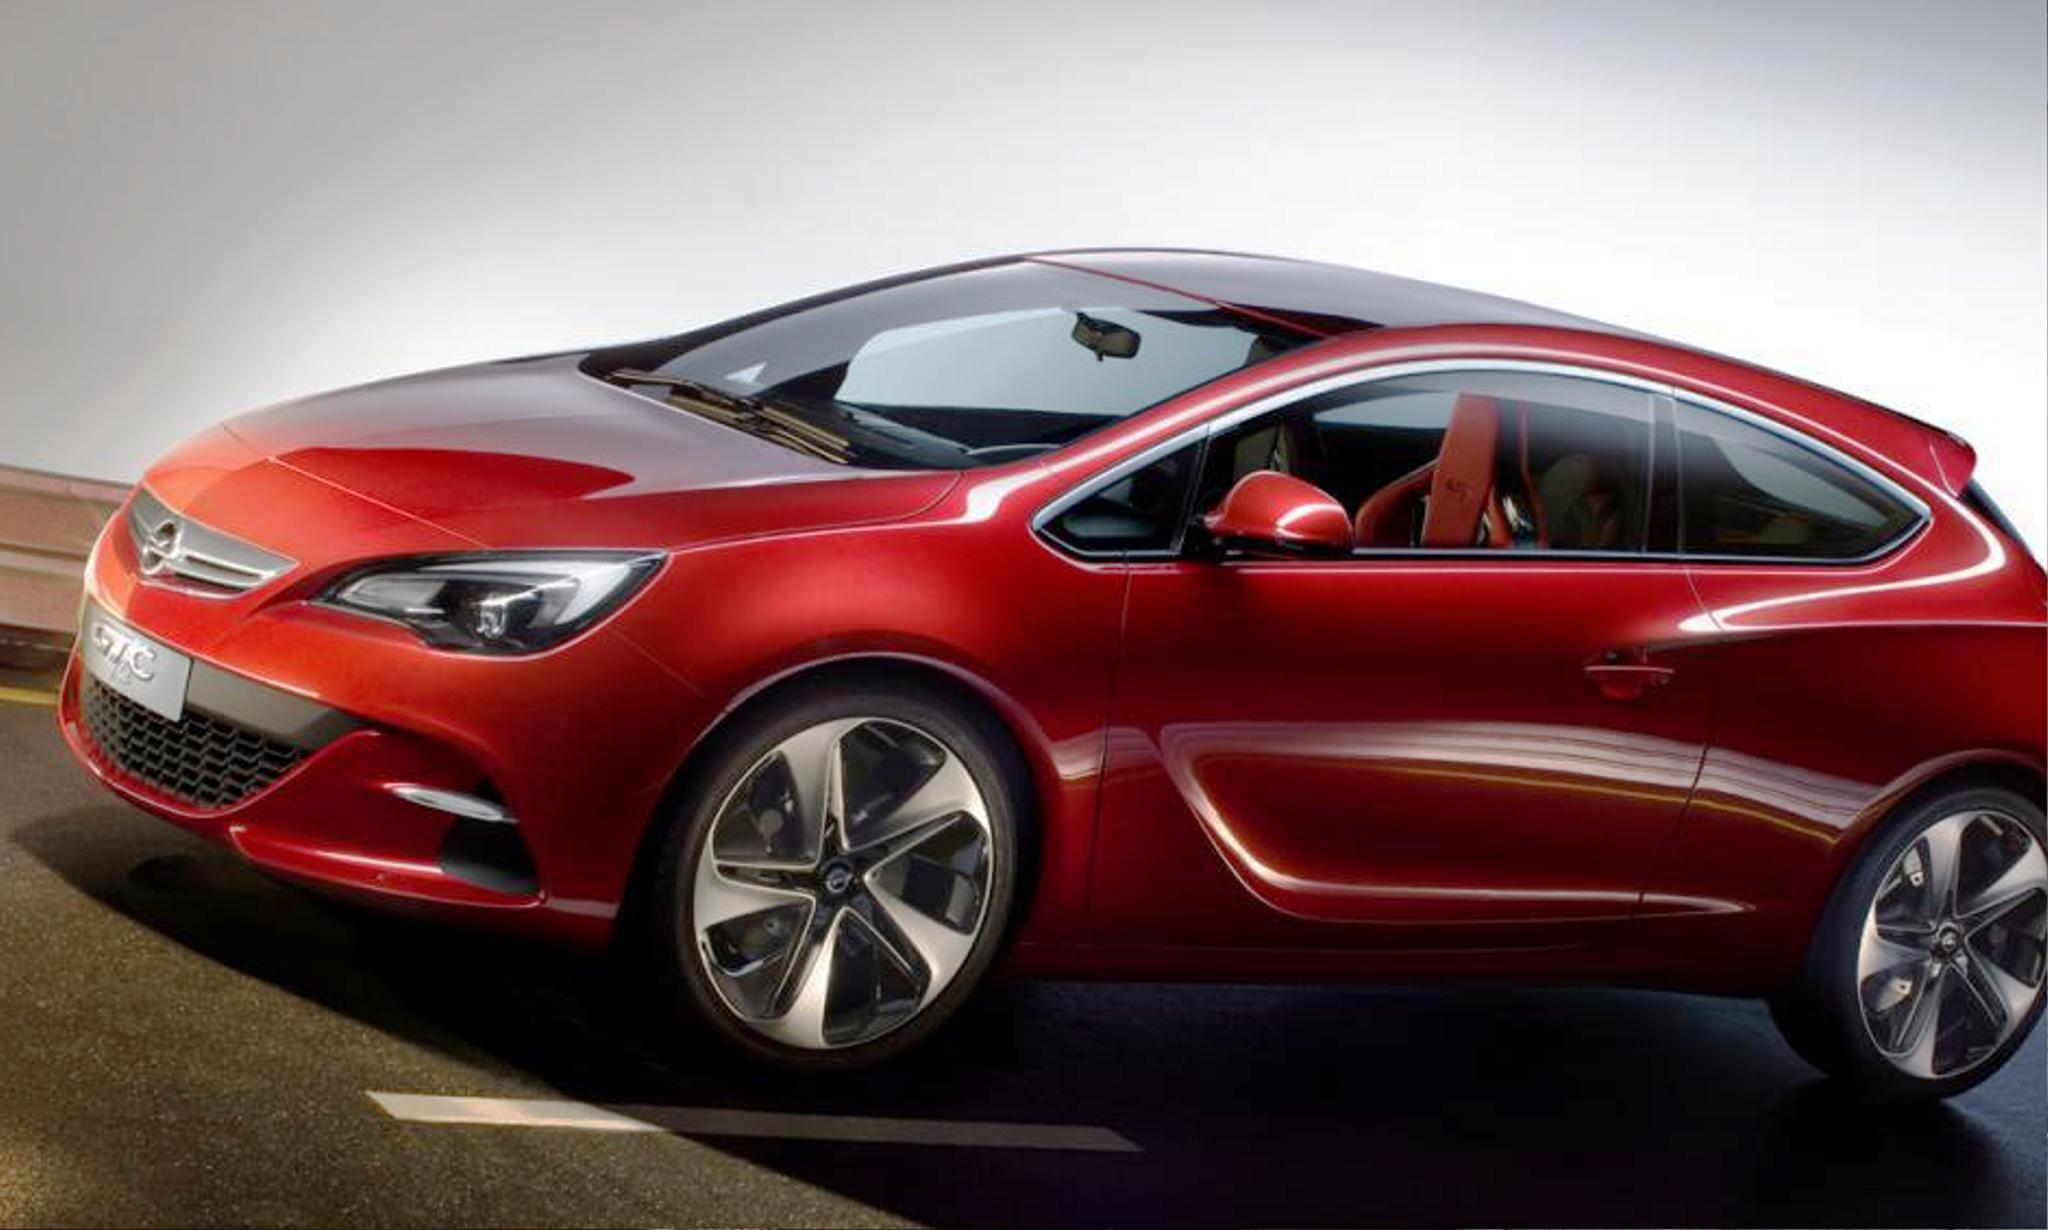 THE NEW OPEL ASTRA GTC TO PREMIERE IN FRANKFURT MOTOR SHOW 